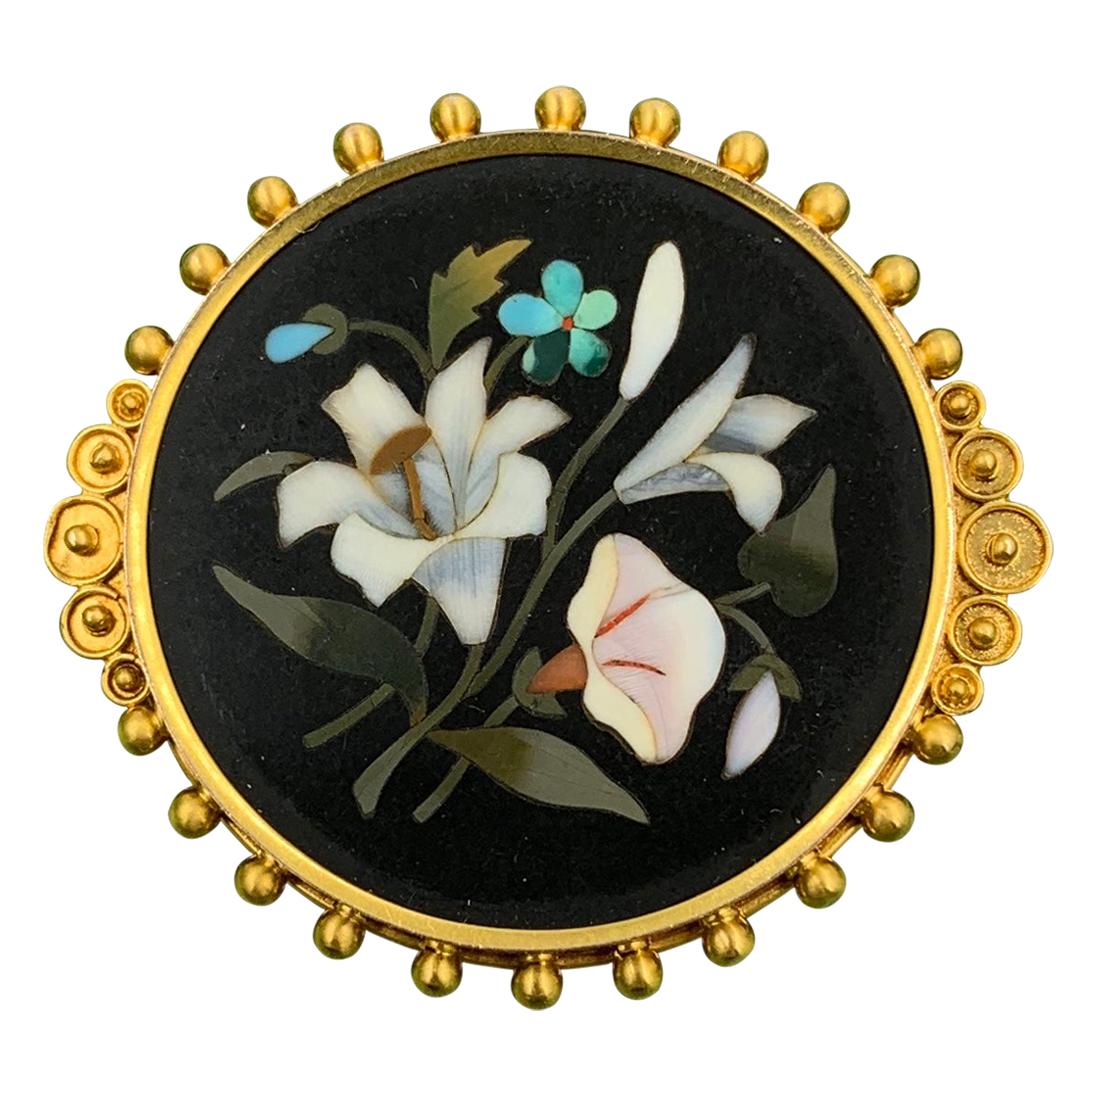 Pietra Dura Flower Lily Poppy Brooch Pin Gold Antique Victorian Etruscan Revival